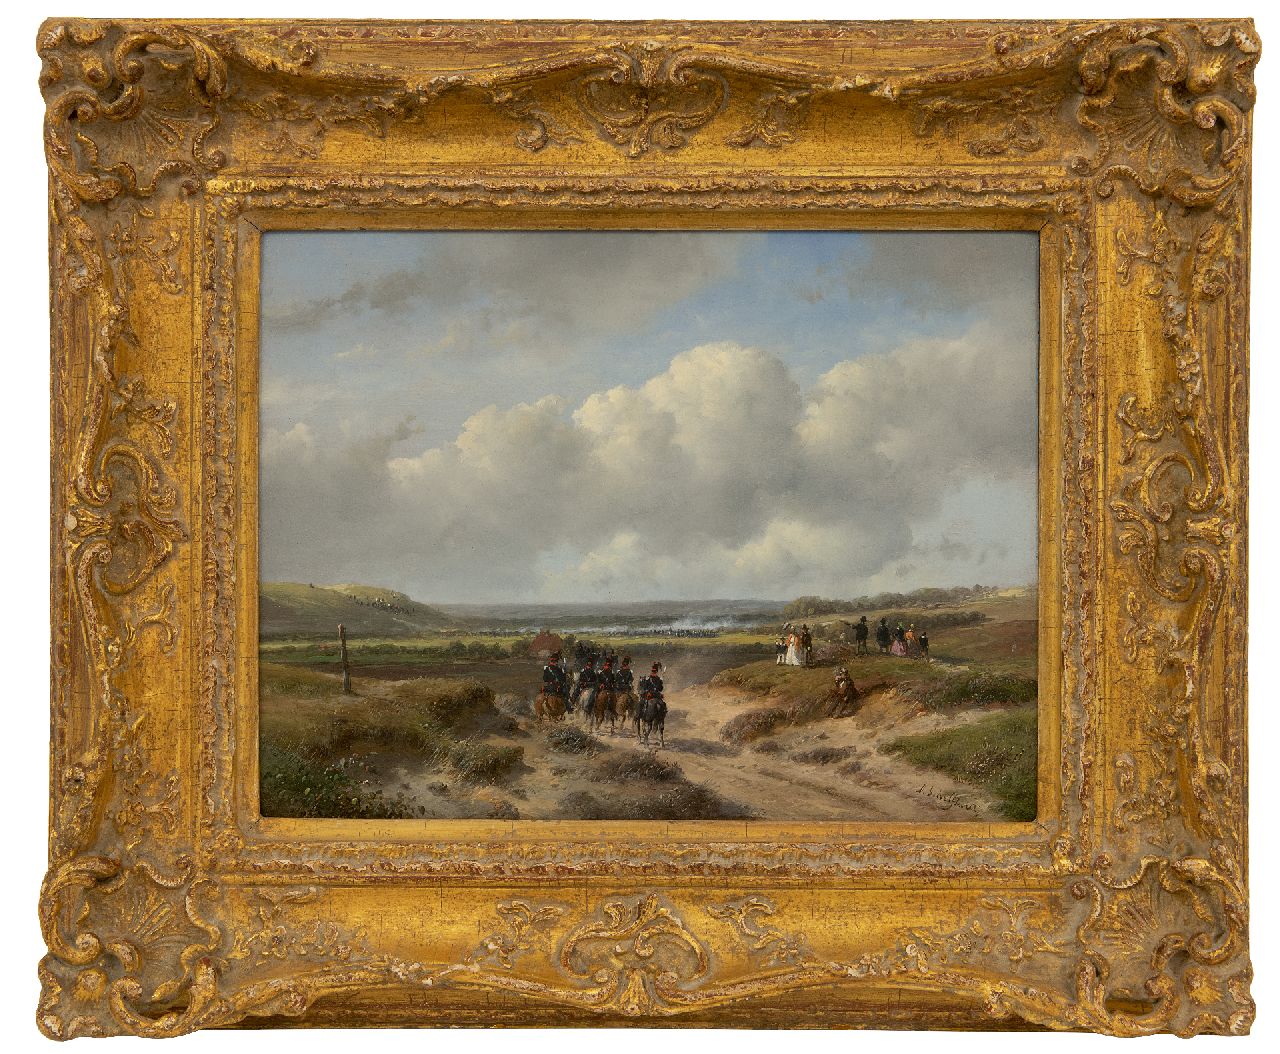 Schelfhout A.  | Andreas Schelfhout | Paintings offered for sale | The Hague garrison at the Waalsdorpervlakte, oil on panel 22.1 x 29.2 cm, signed l.r. and painted ca. 1862